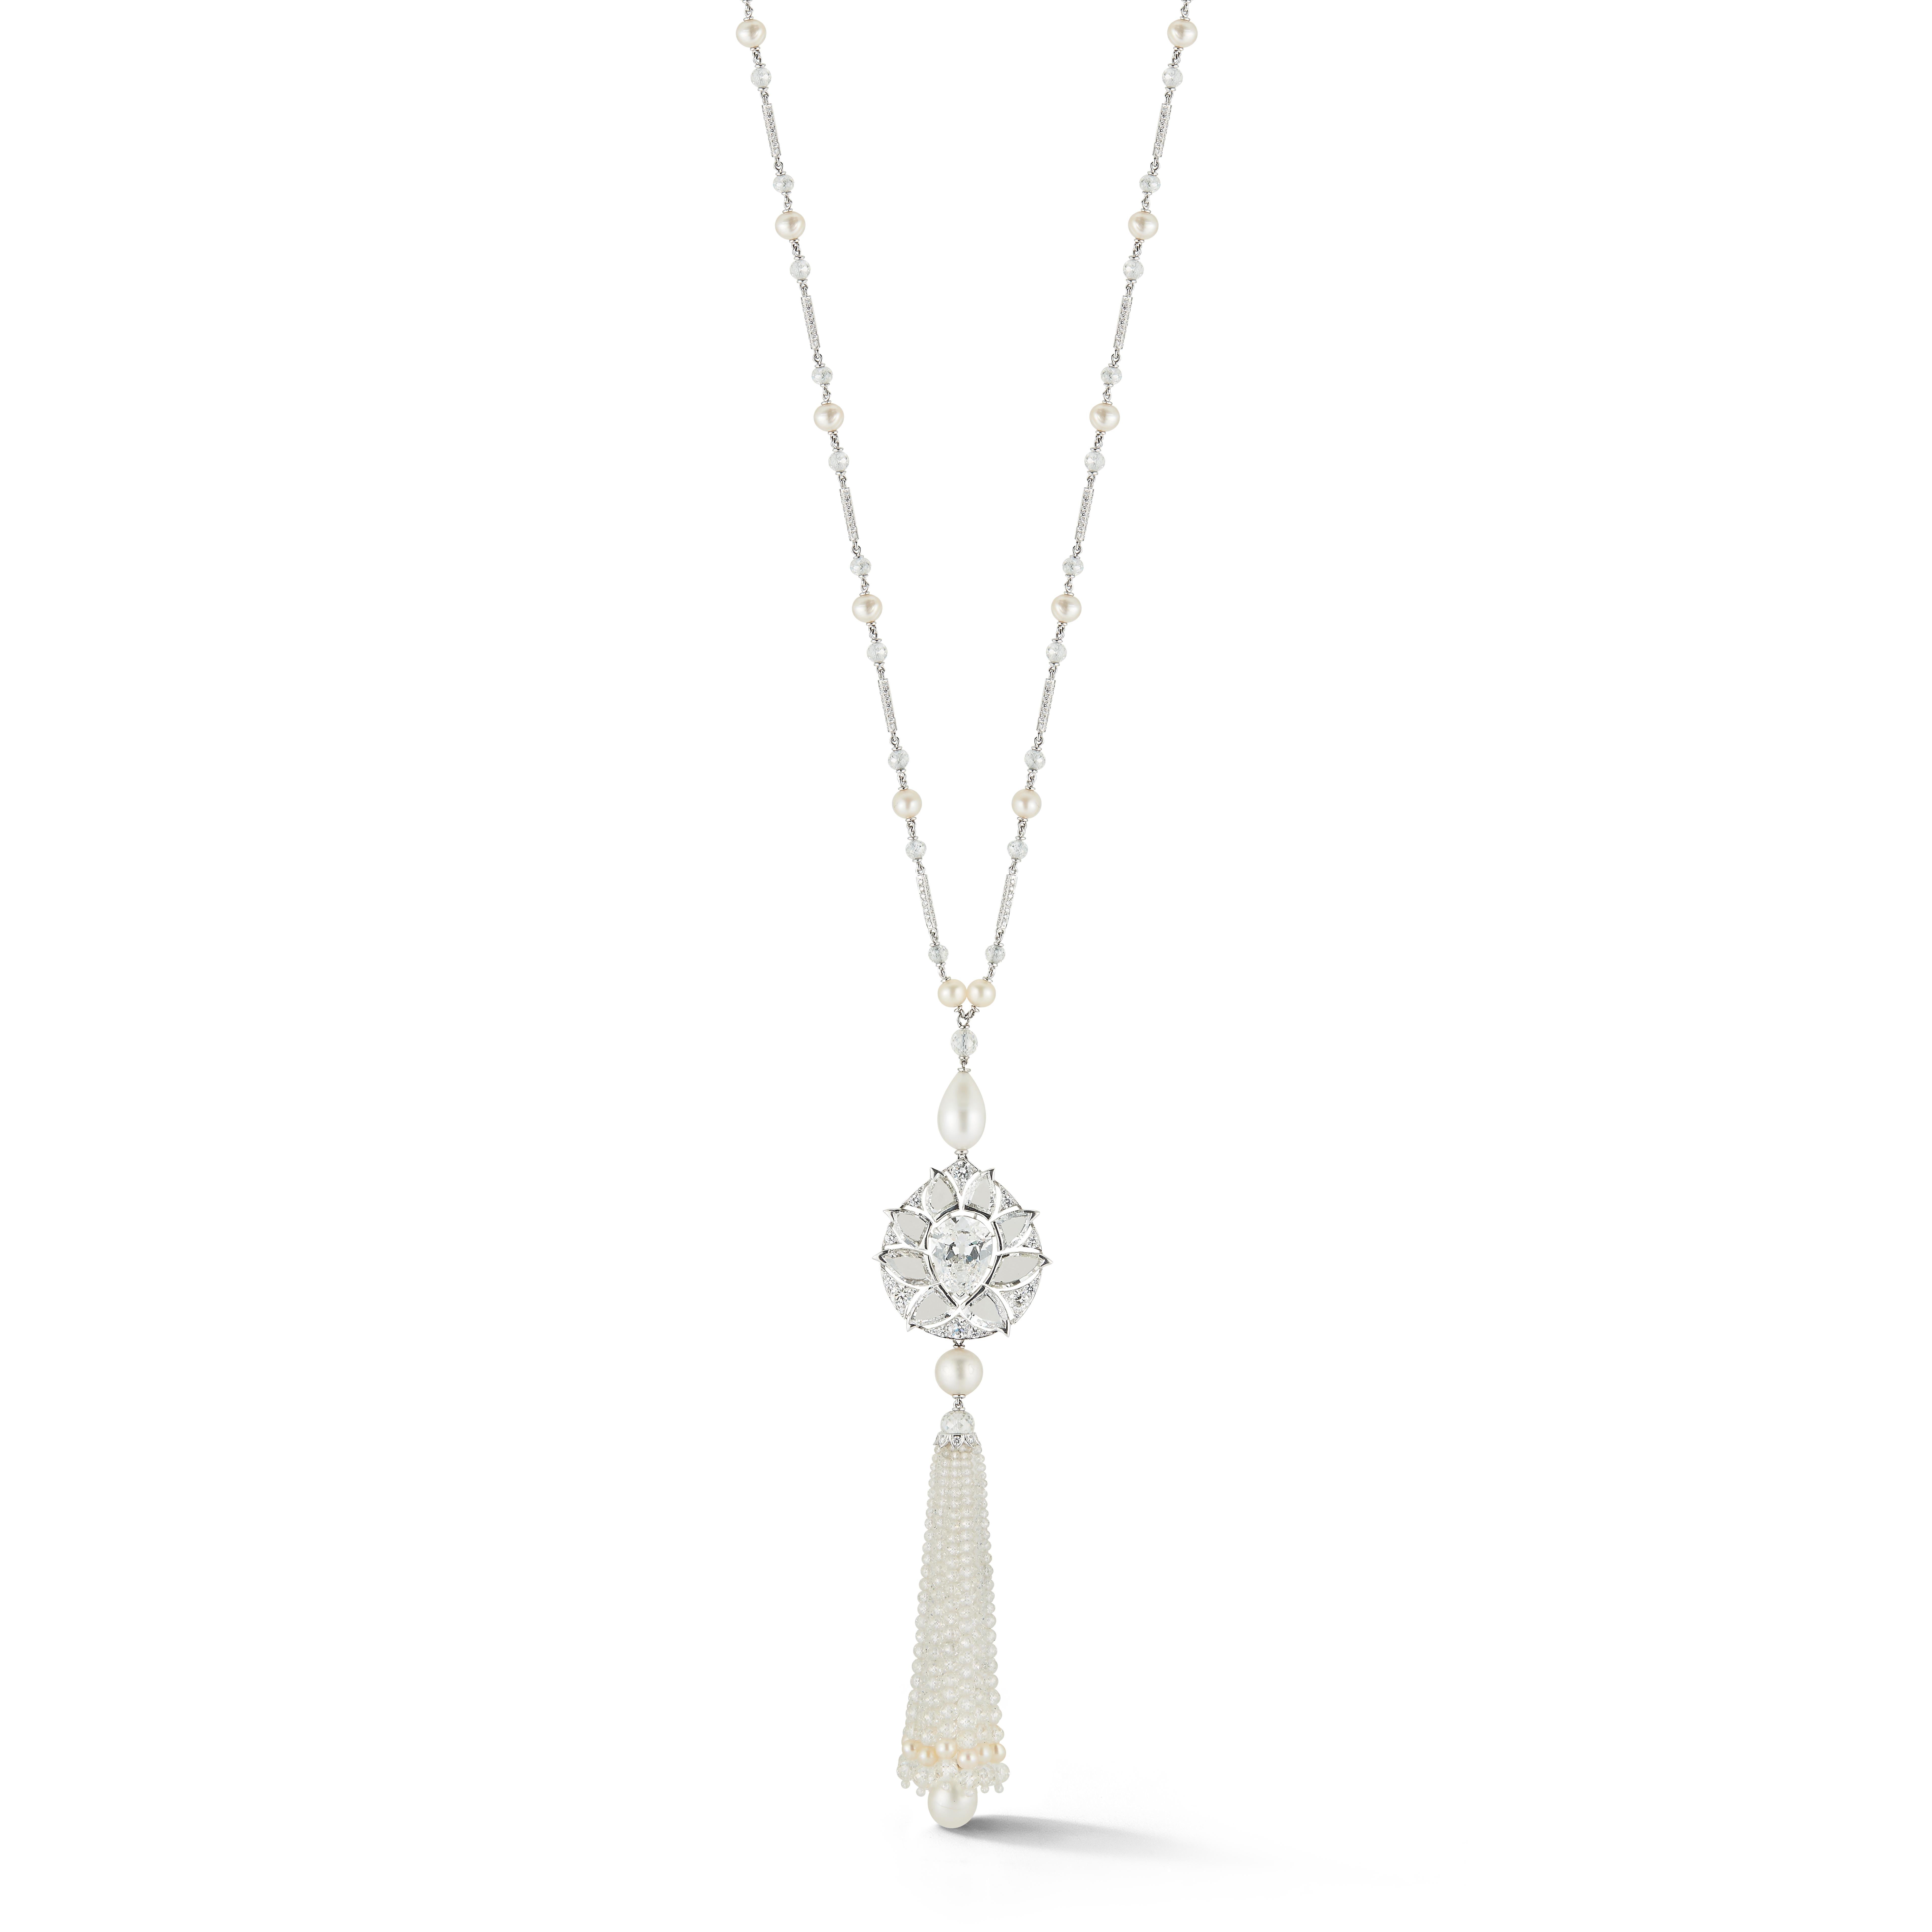 Diamond and Natural Pearl Tassel Sautoir Necklace Masterpiece by Viren Bhagat

Center antique old mine pear shape GIA certified diamond is 5.03 ct G color, VS2 clarity framed by 8 very impressive table cut (or rose cut) diamonds. 

The tassel is